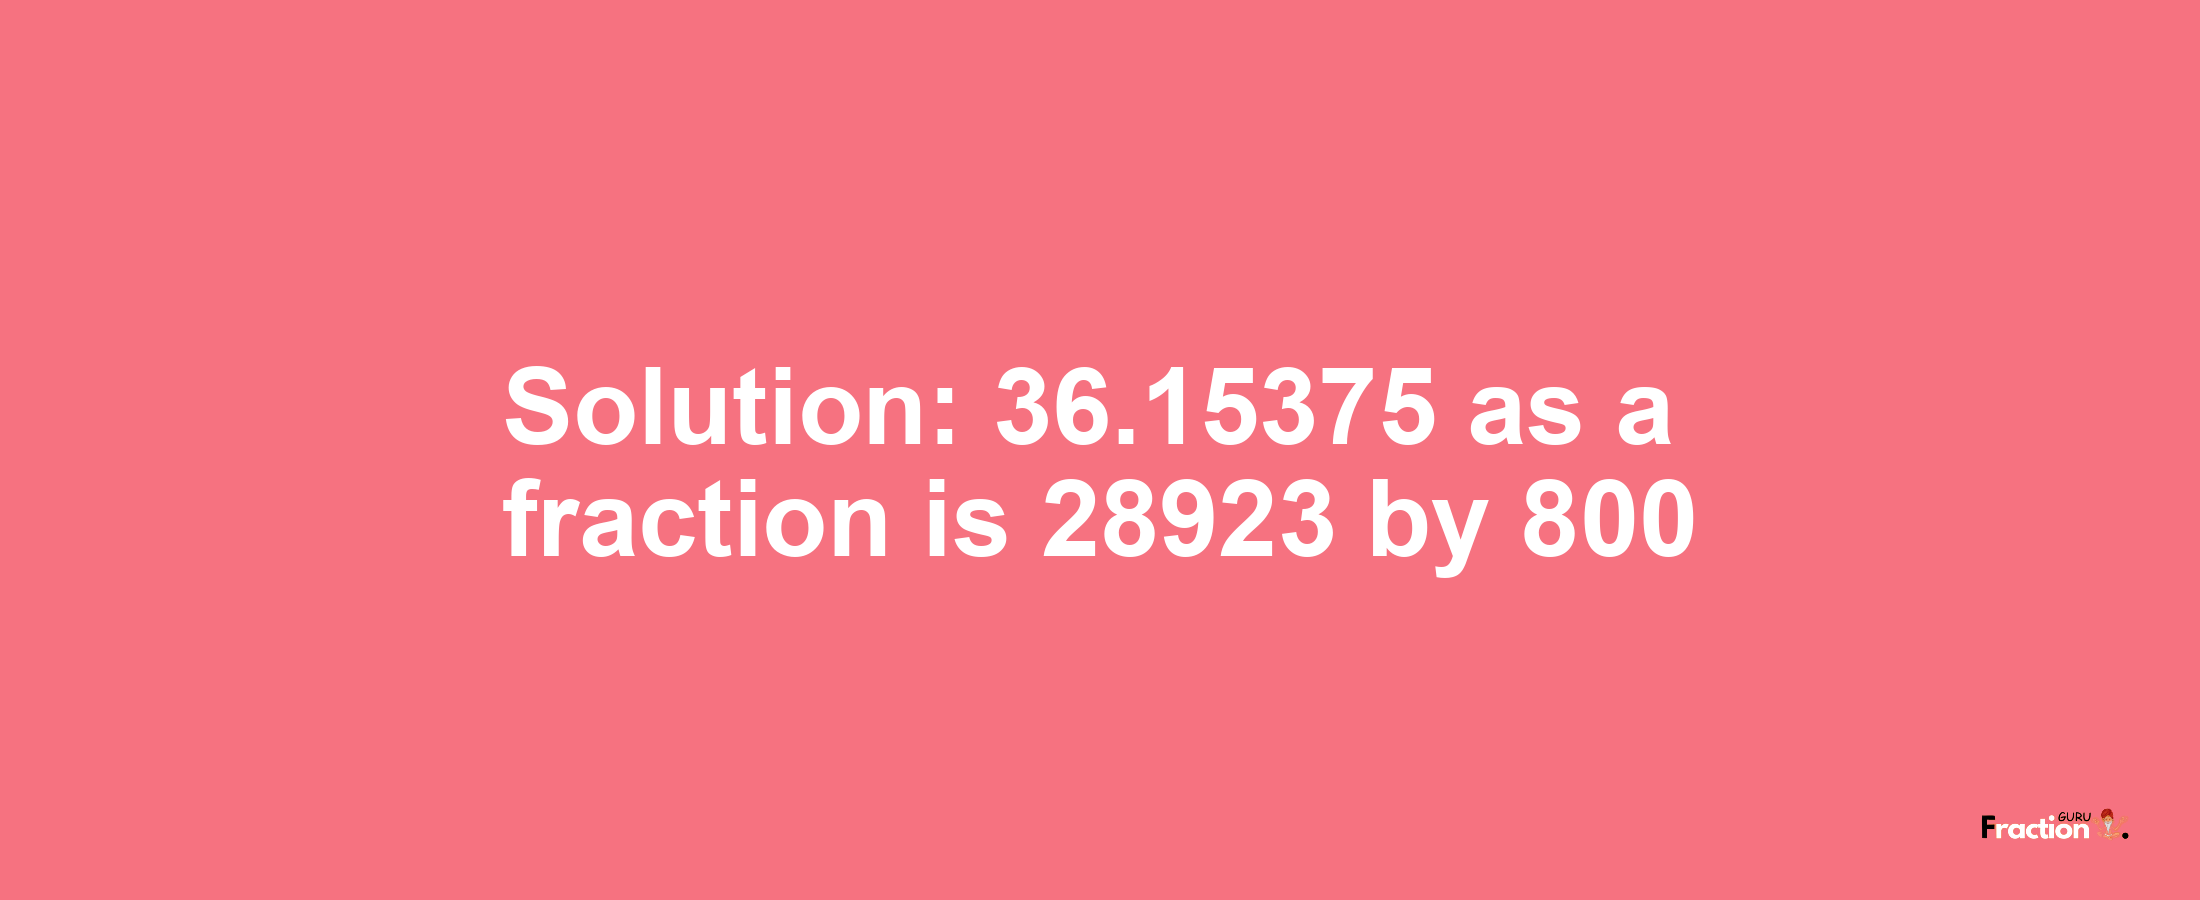 Solution:36.15375 as a fraction is 28923/800